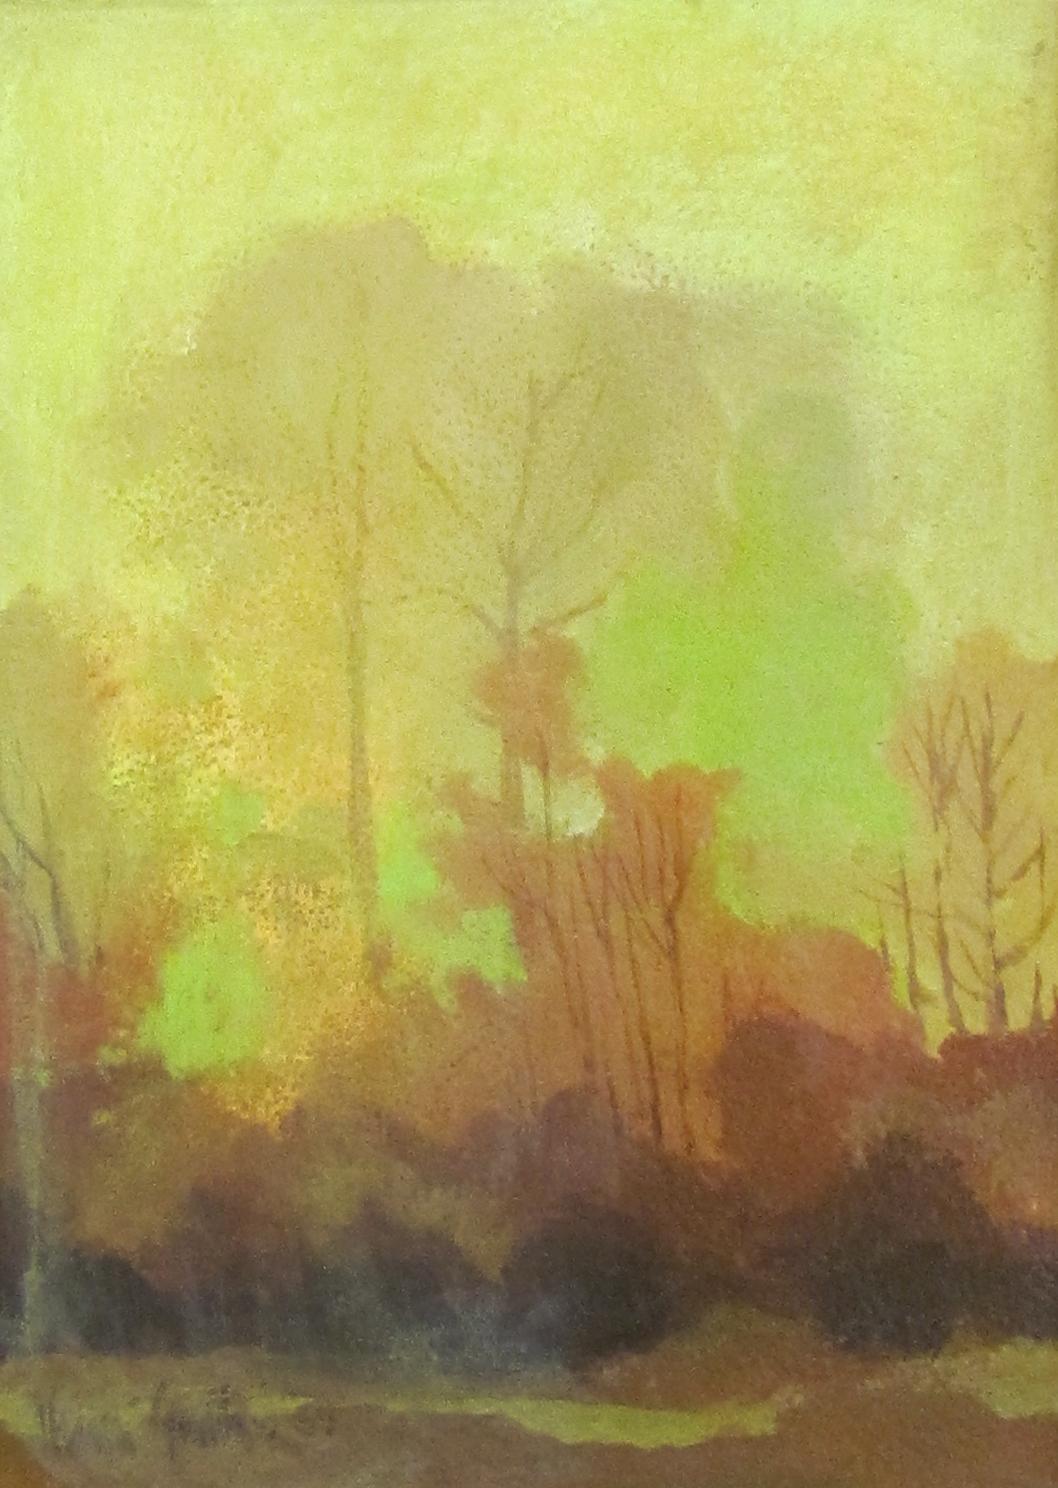 Impressionisit Landscape with Trees - Painting by Henri Gadbois